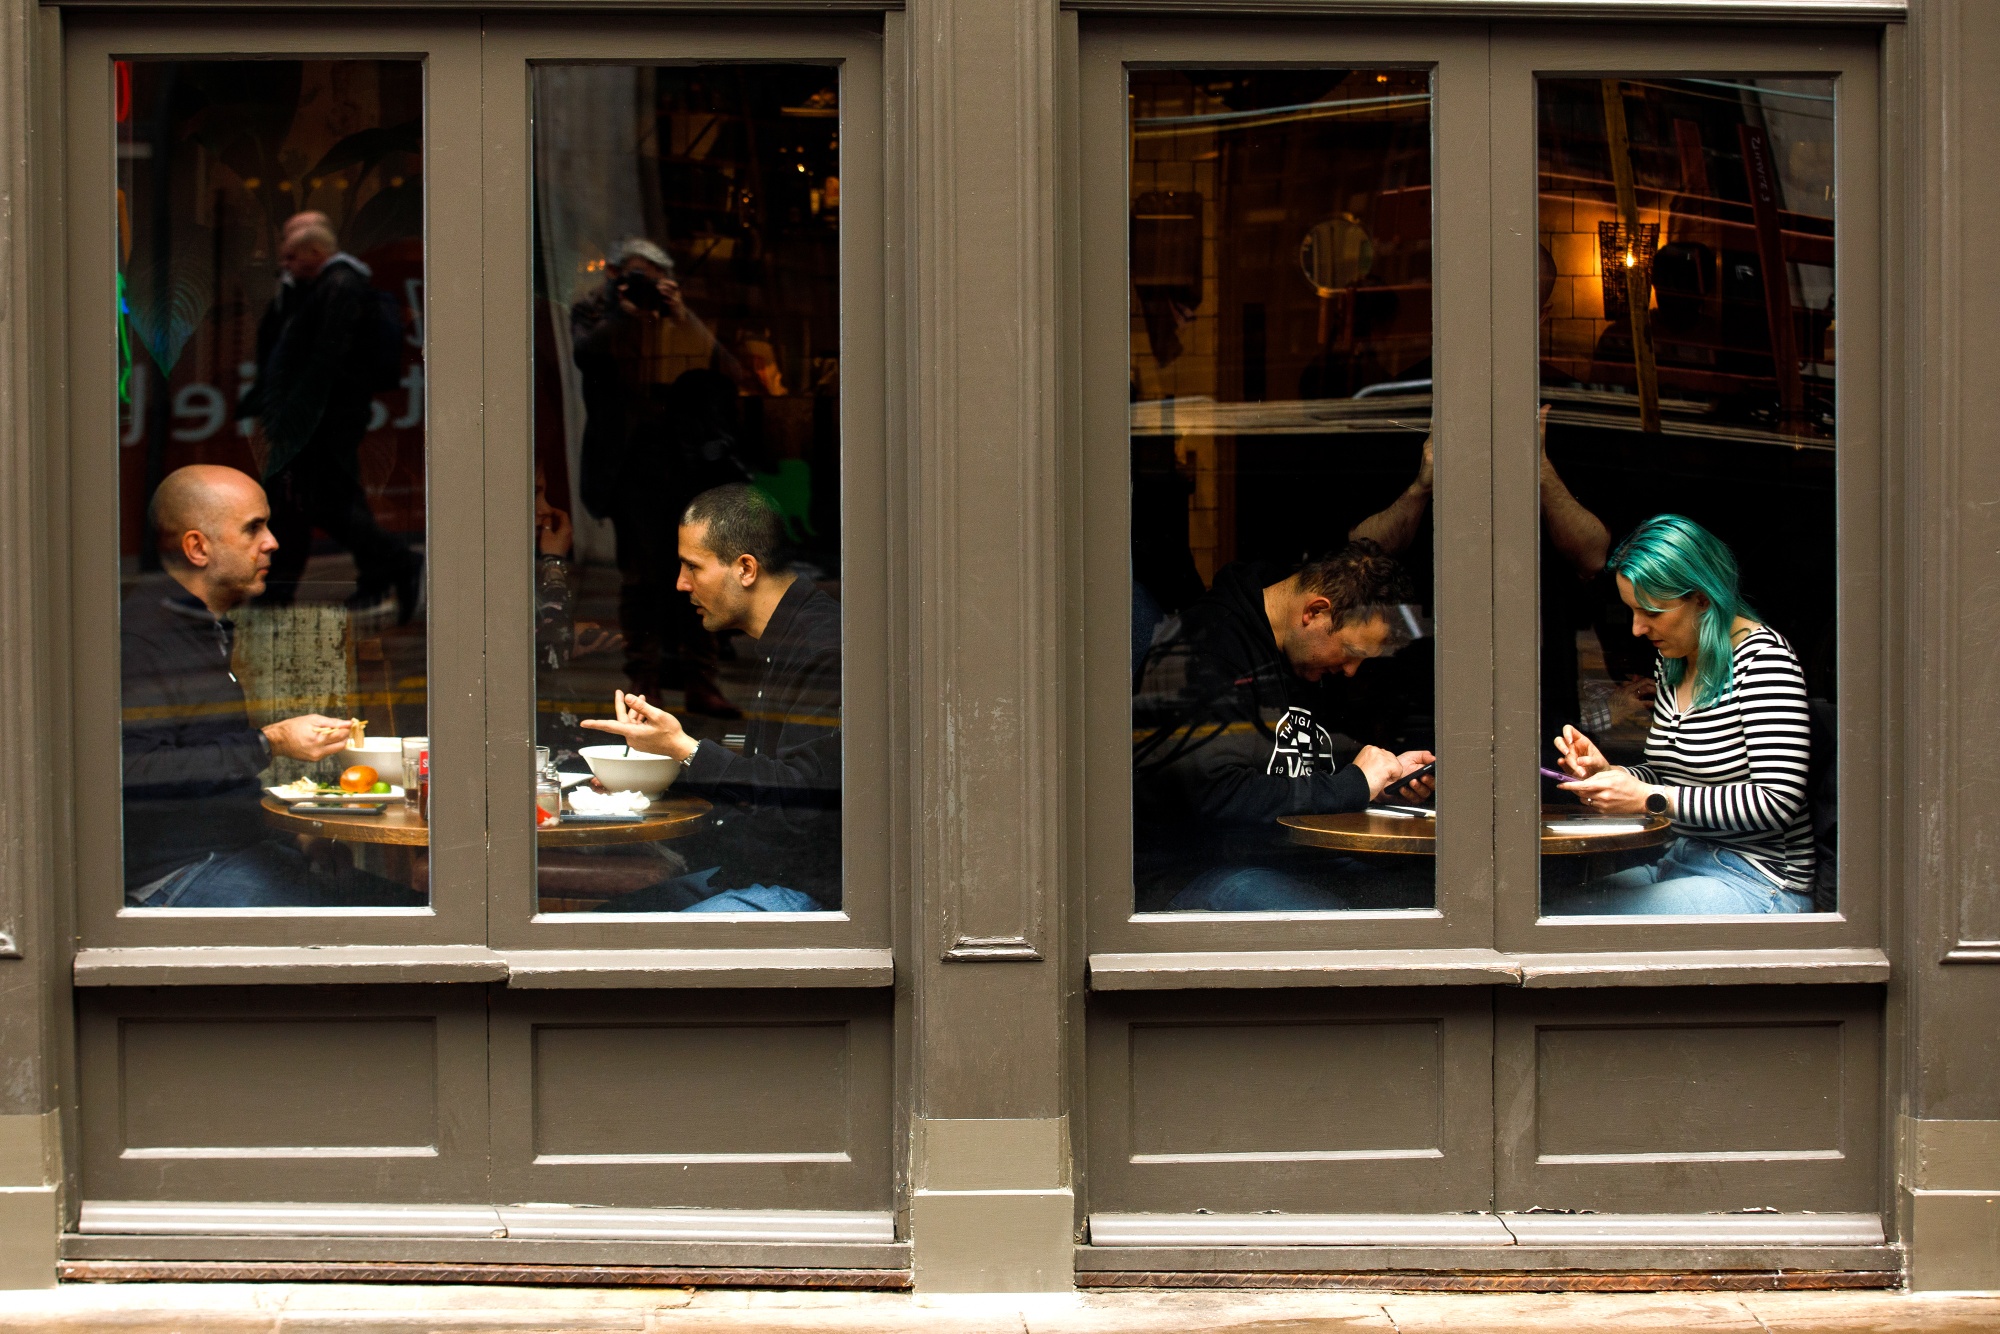 Most Covid-19 restrictions are being lifted in England. Above,&nbsp;customers dine at a restaurant in London.